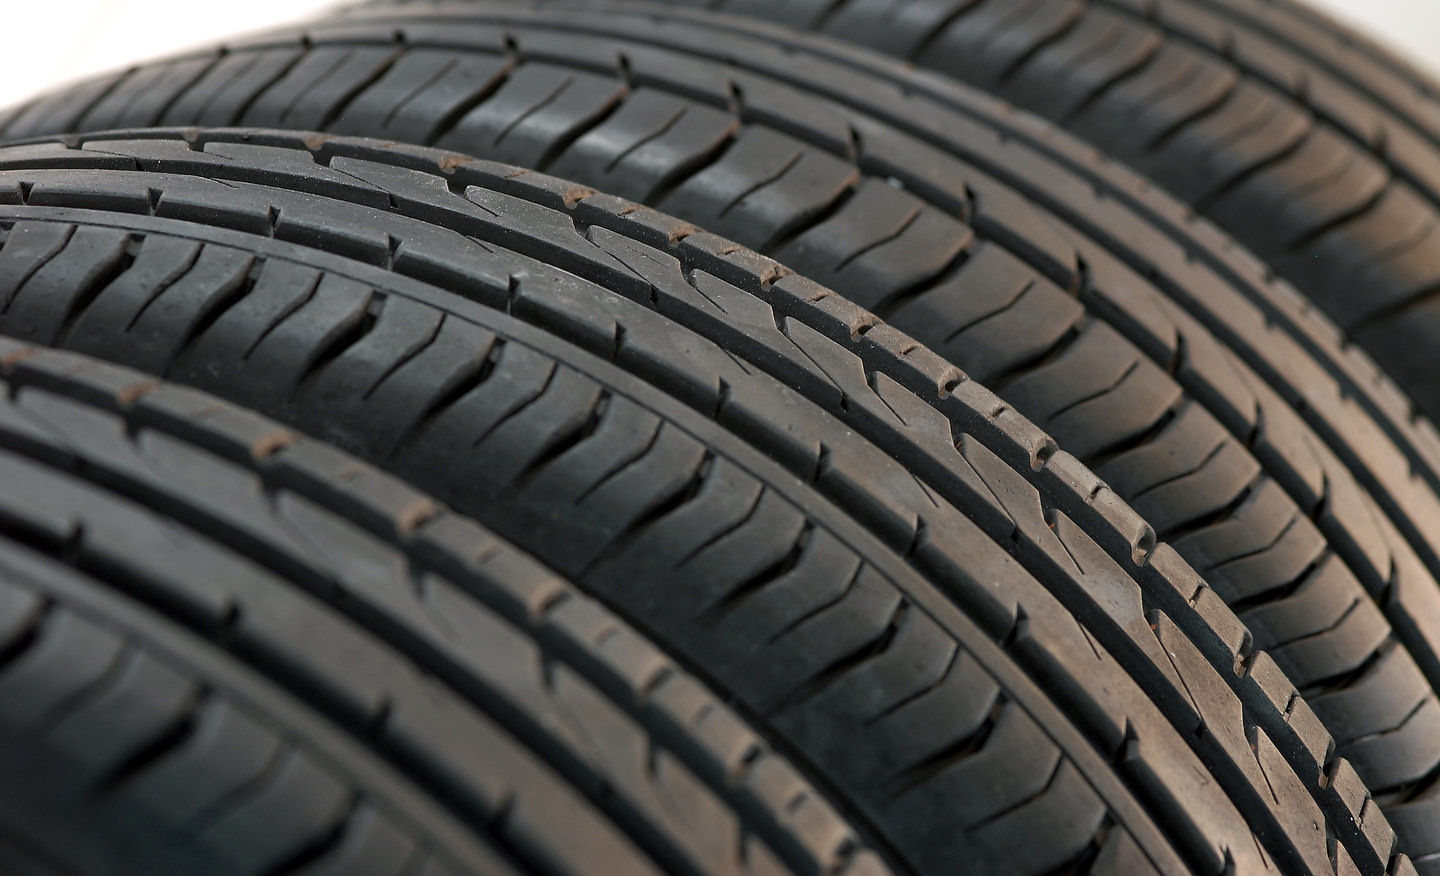 Three tips for choosing the right summer tires